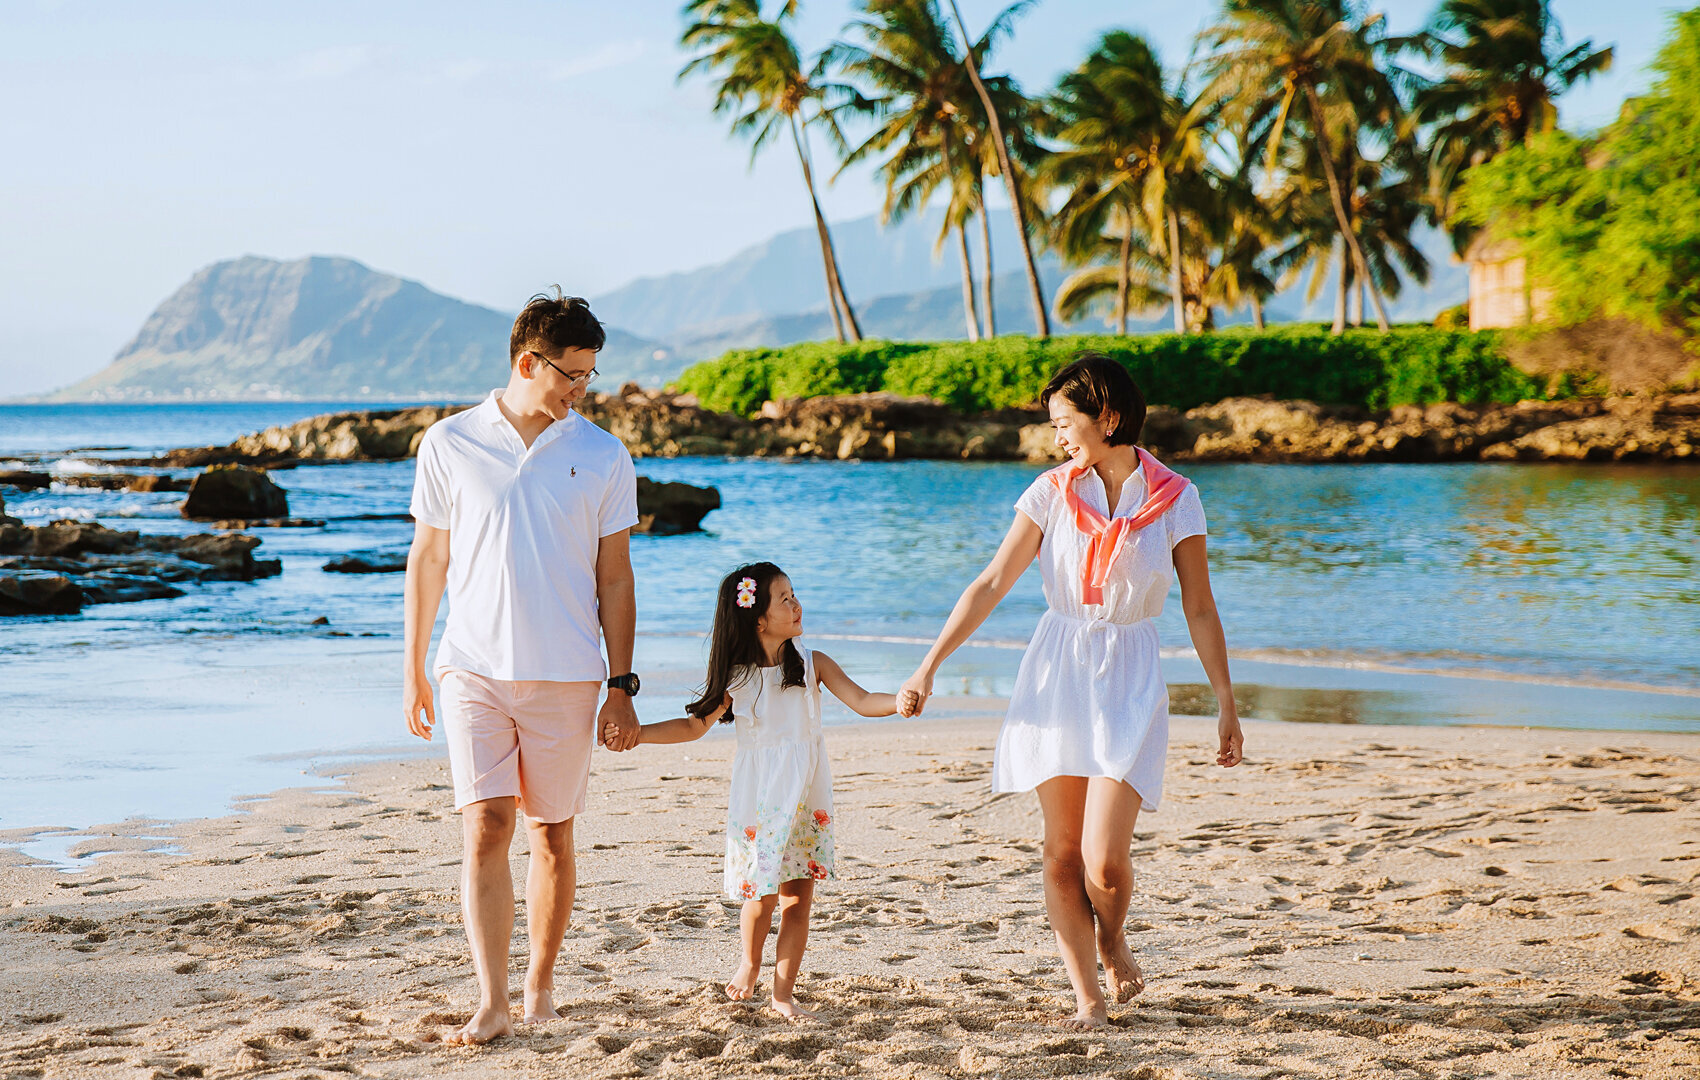 Mum and dad on each side of their daughter holding hands and swinging her higher than ever on Waikiki beach family portrait.